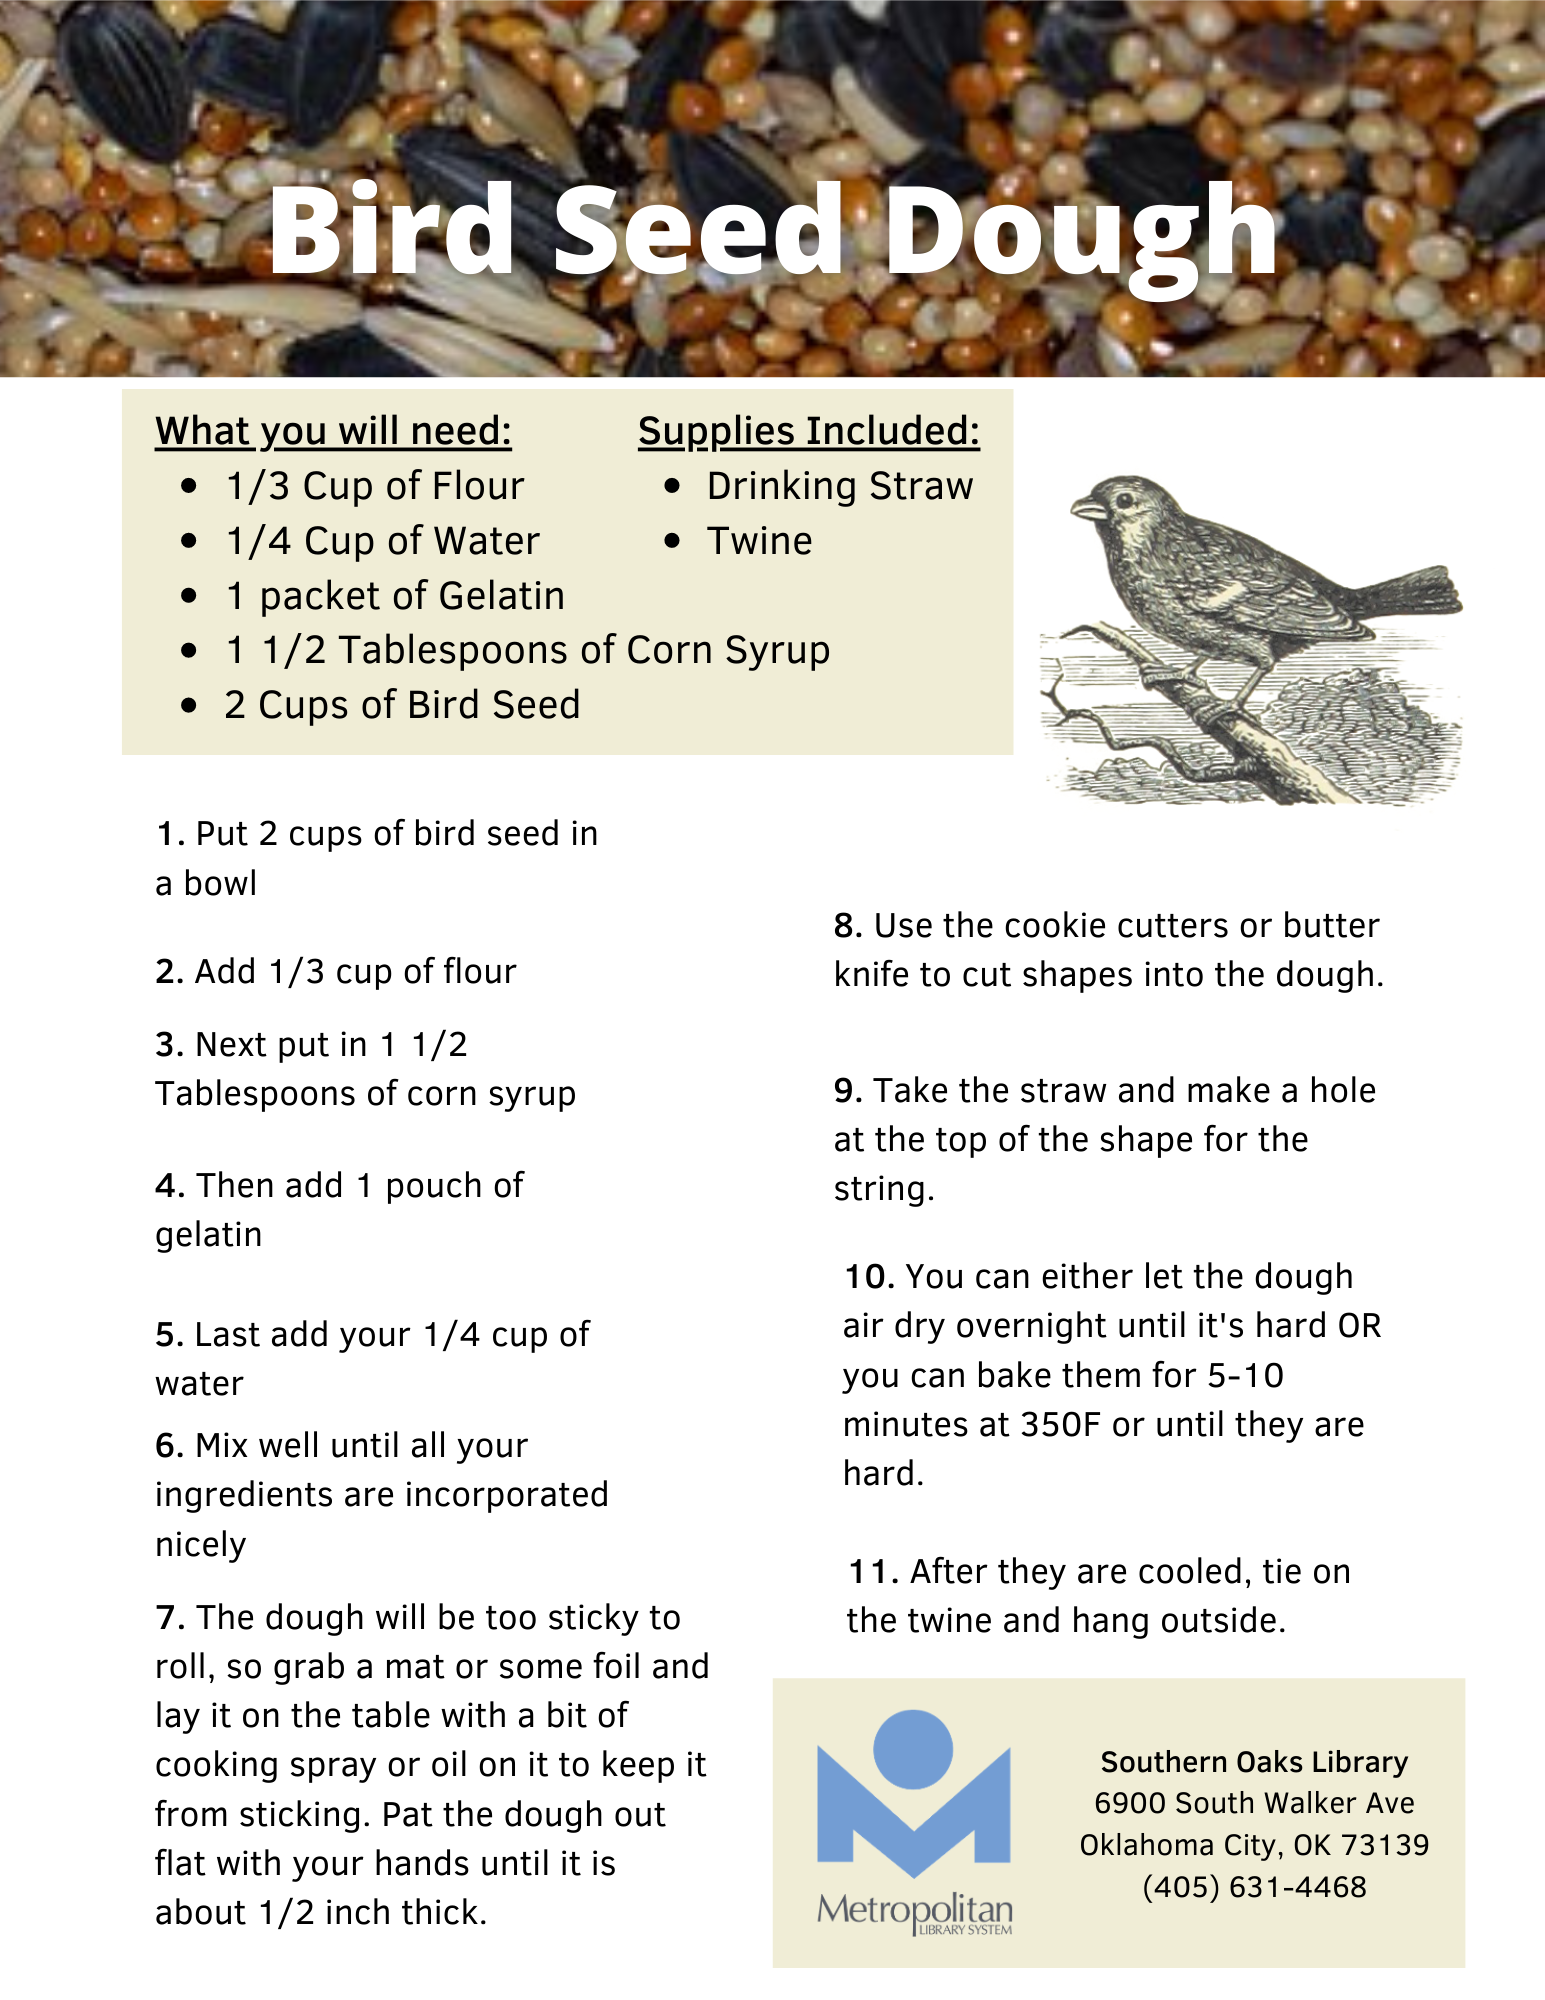 The recipe and instructions to make bird seed dough